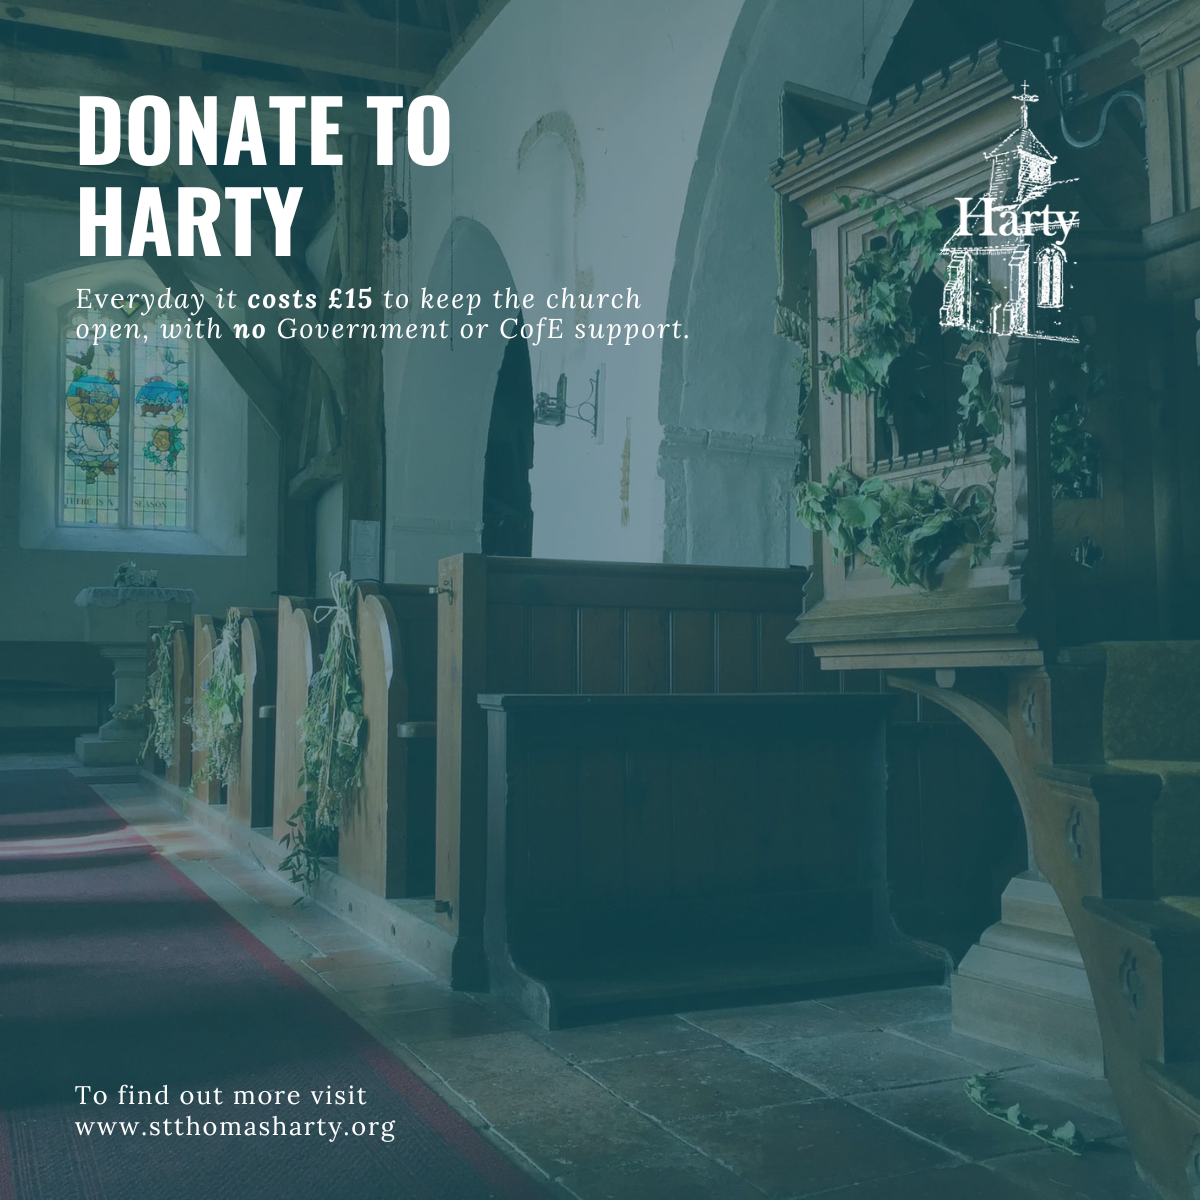 Background image for Harty Church - Online Donation